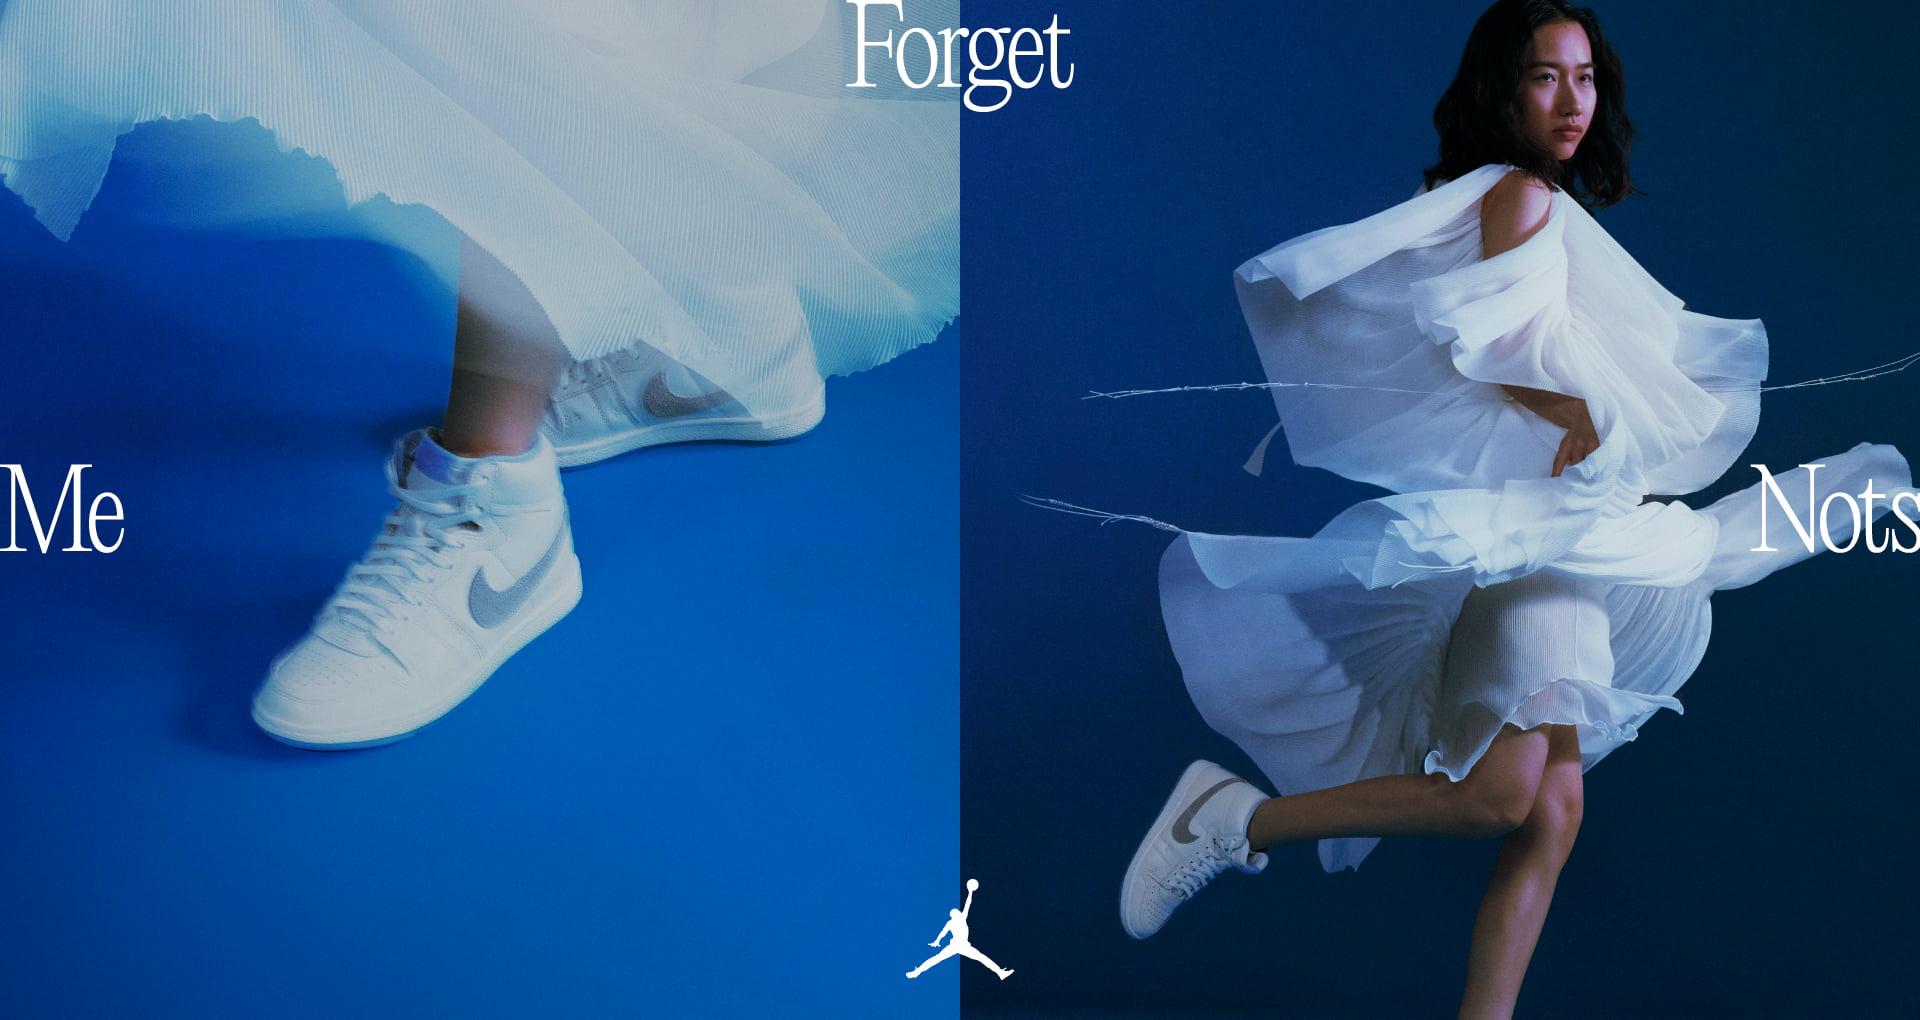 Forget-me-nots × Jordan Air Ship Pop Up Store - FROM BUD TO FLOWER 9/16 Sat -10/1 Sun at Forget-me-nots Daikanyama